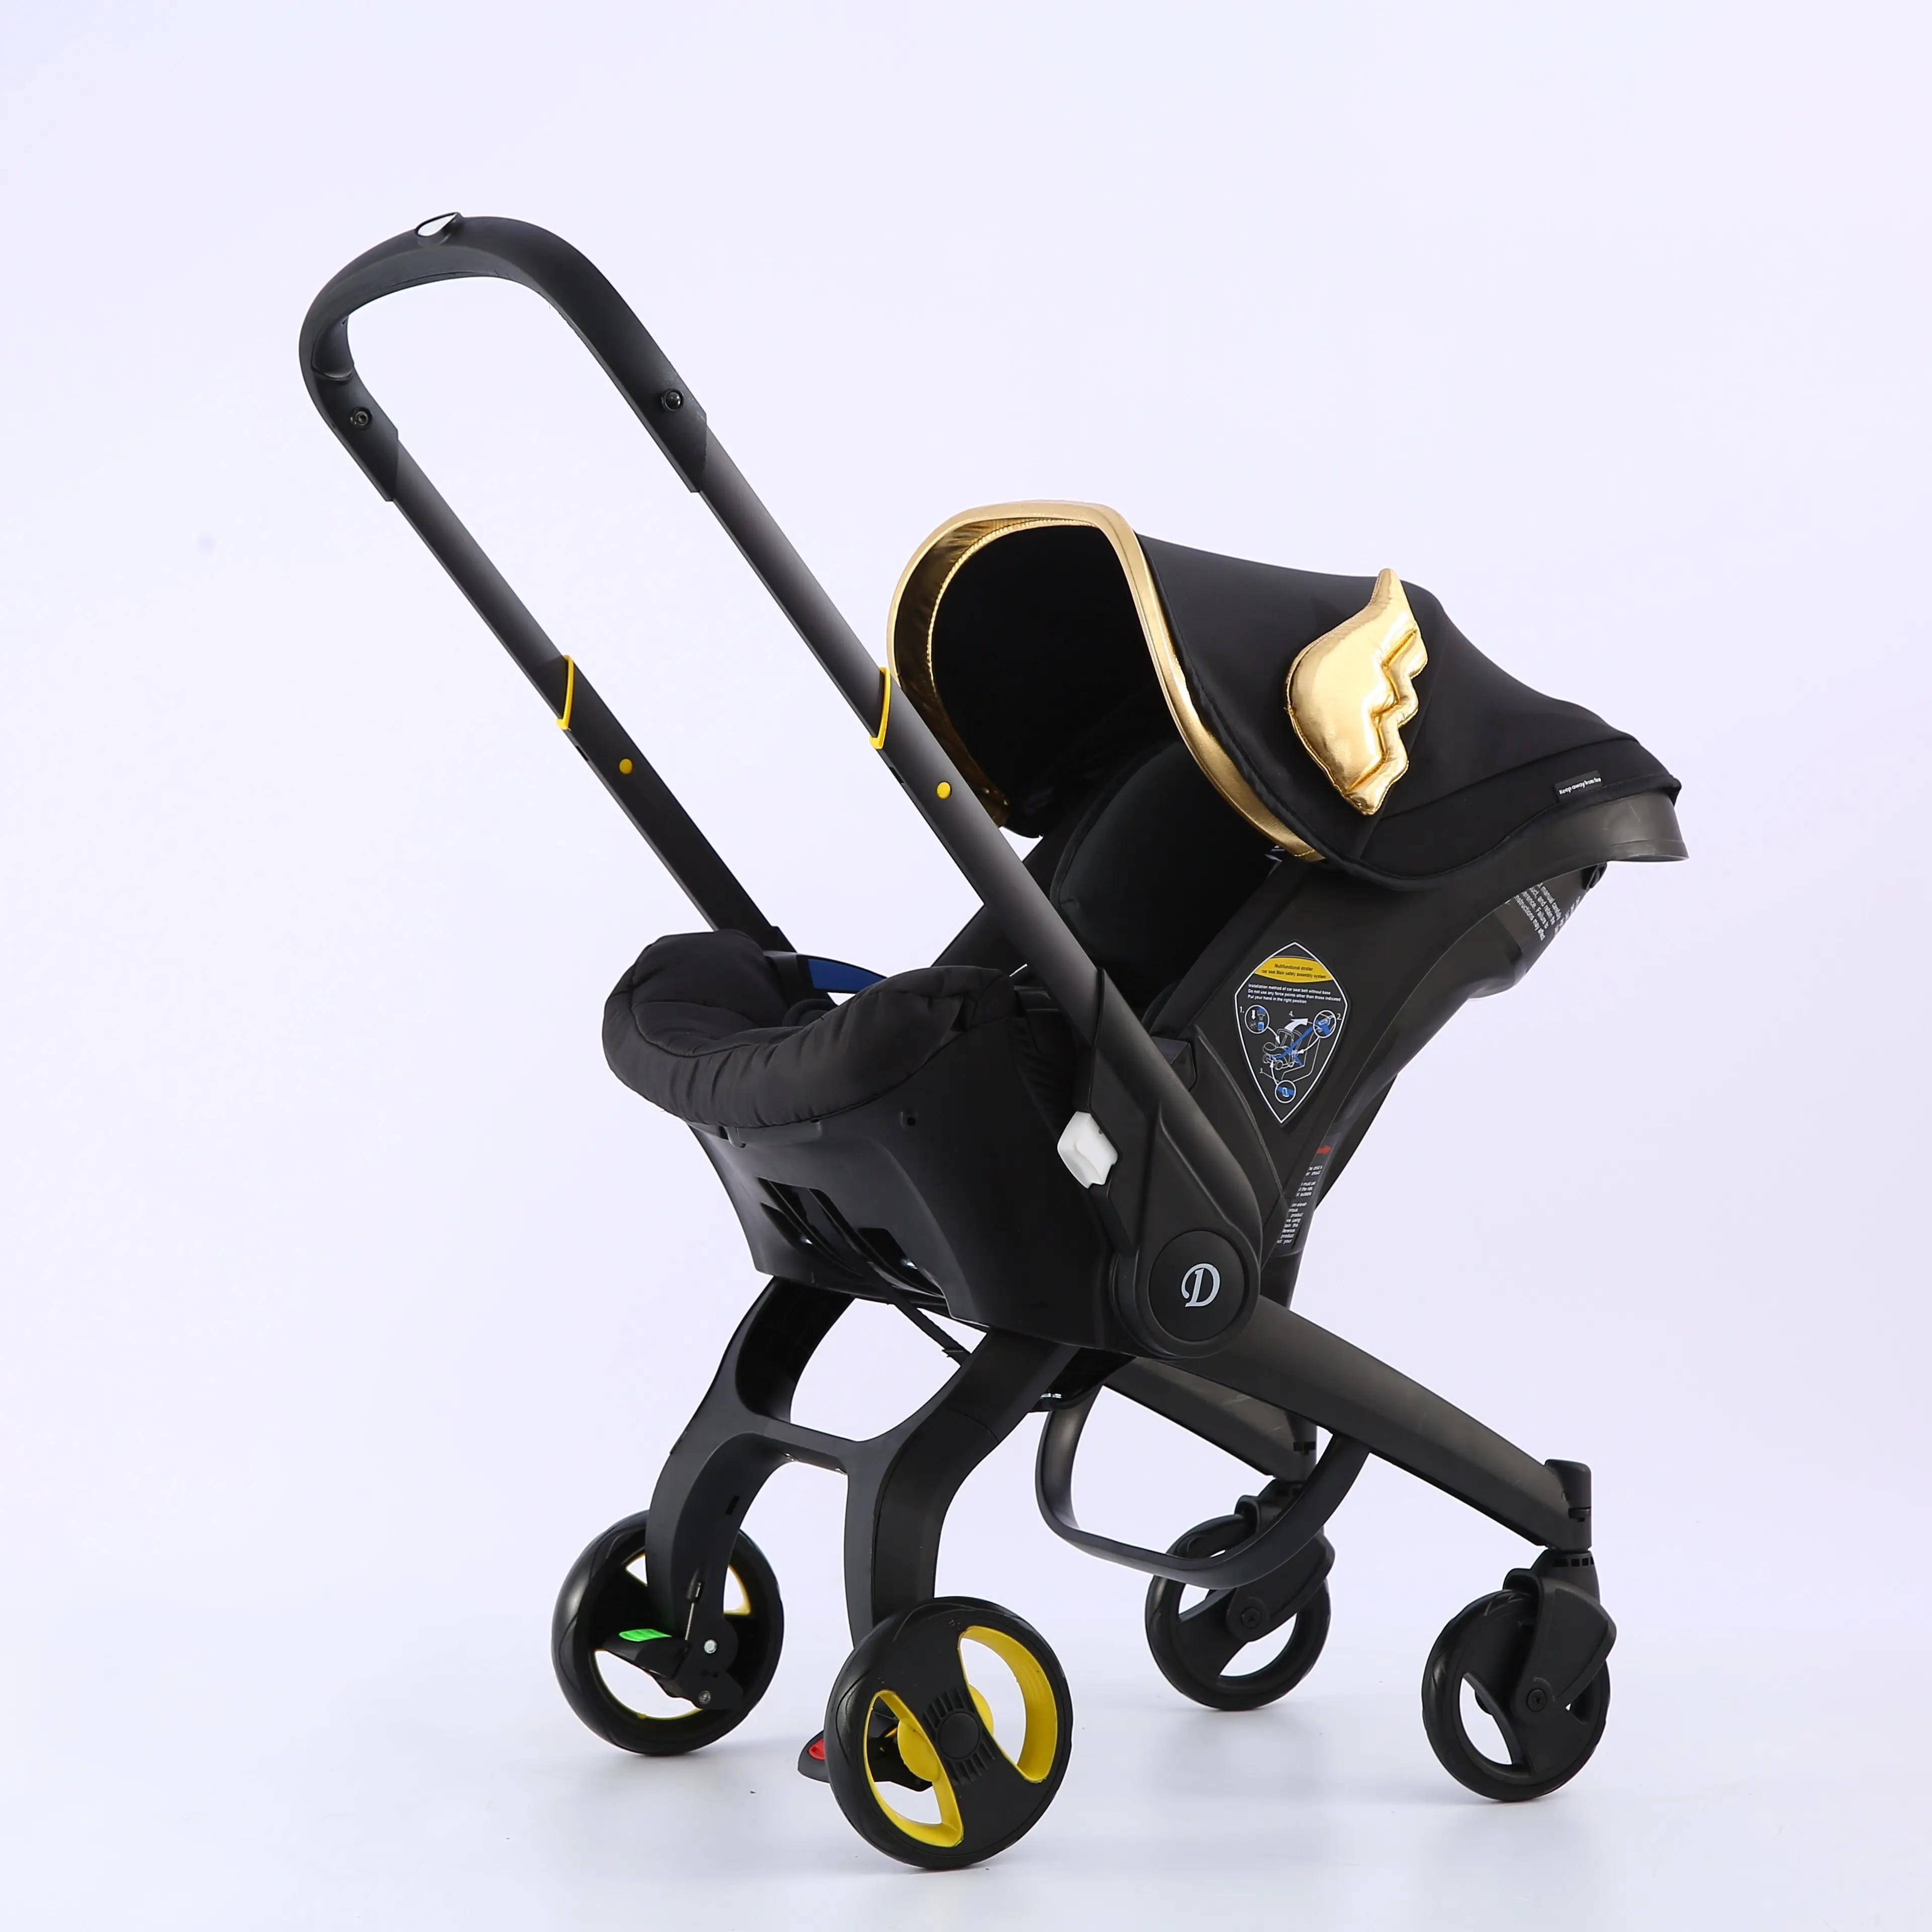 

Multifunctional Baby Stroller Carriage 4 In1 Car Seat Stroller Basket Portable Travel System Stroller Safety Seat for 0-3 Years